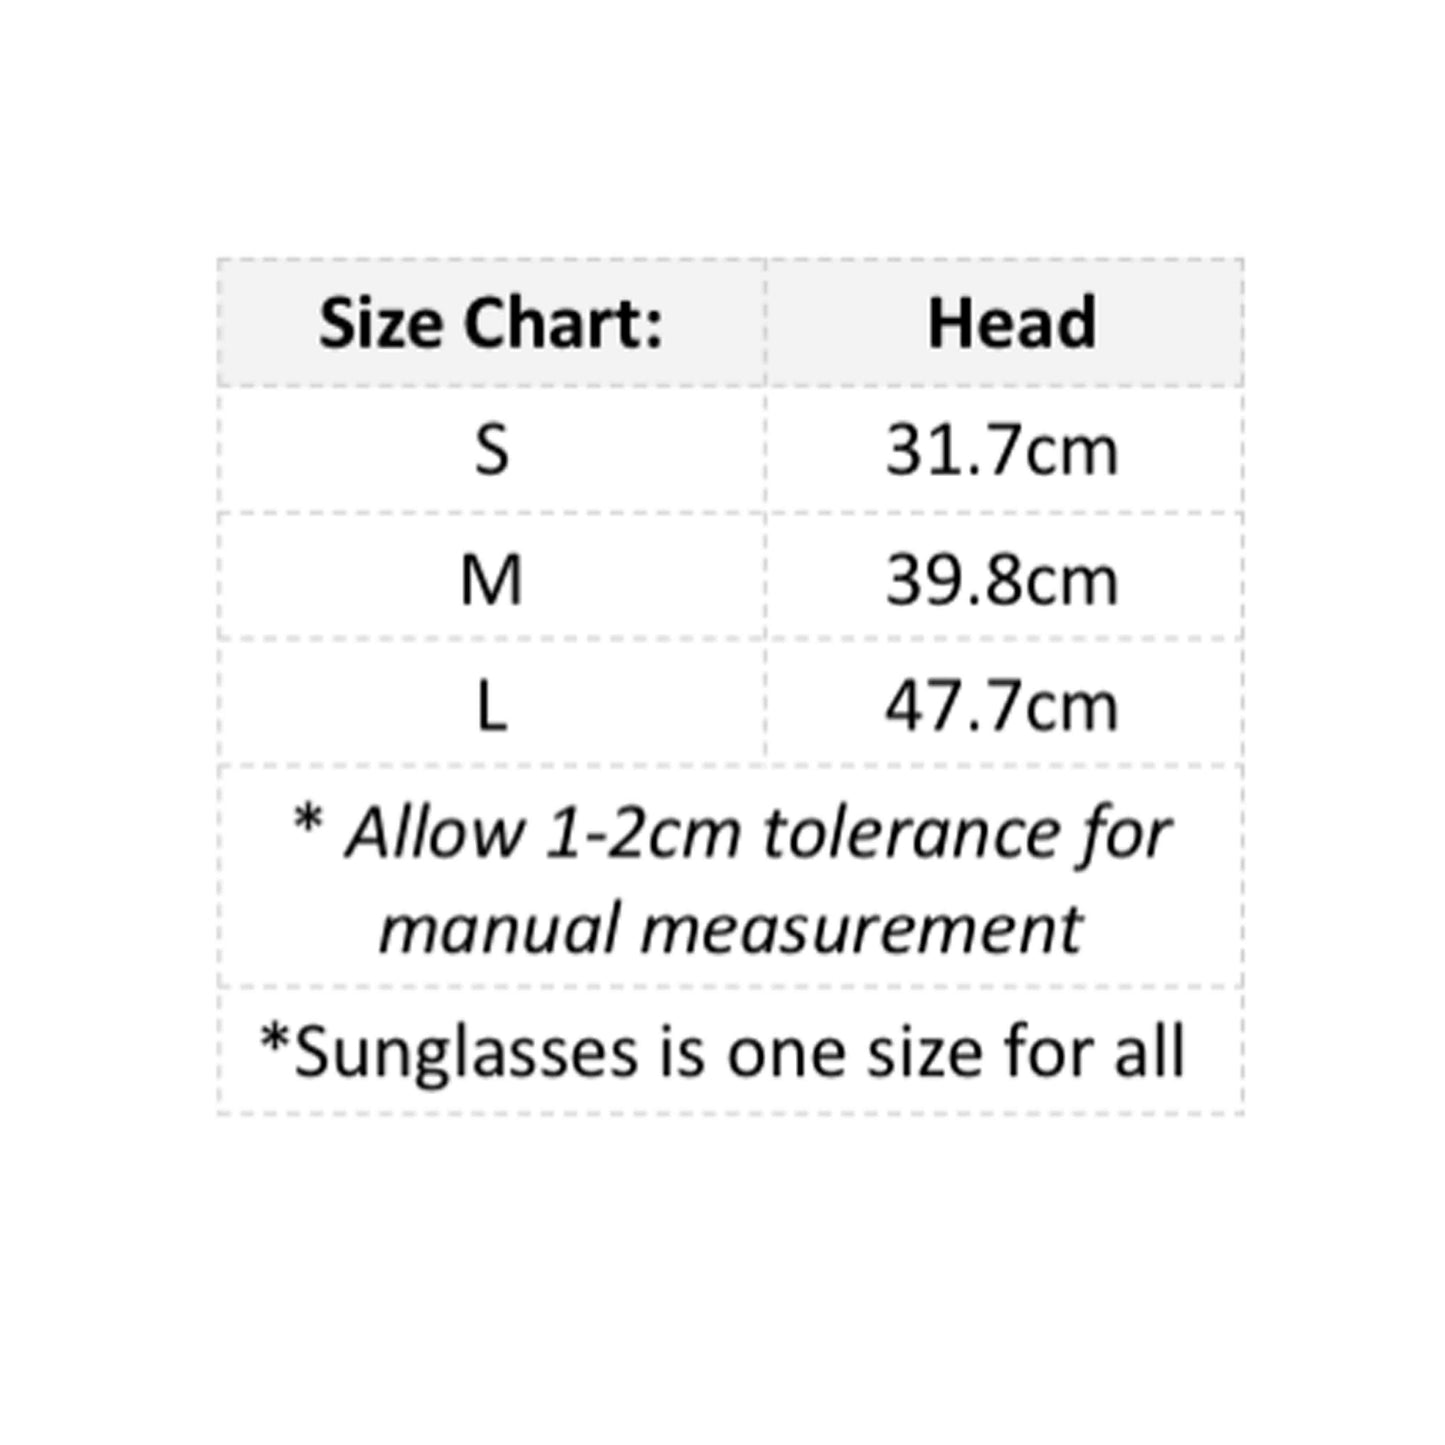 A size chart for the Helmet